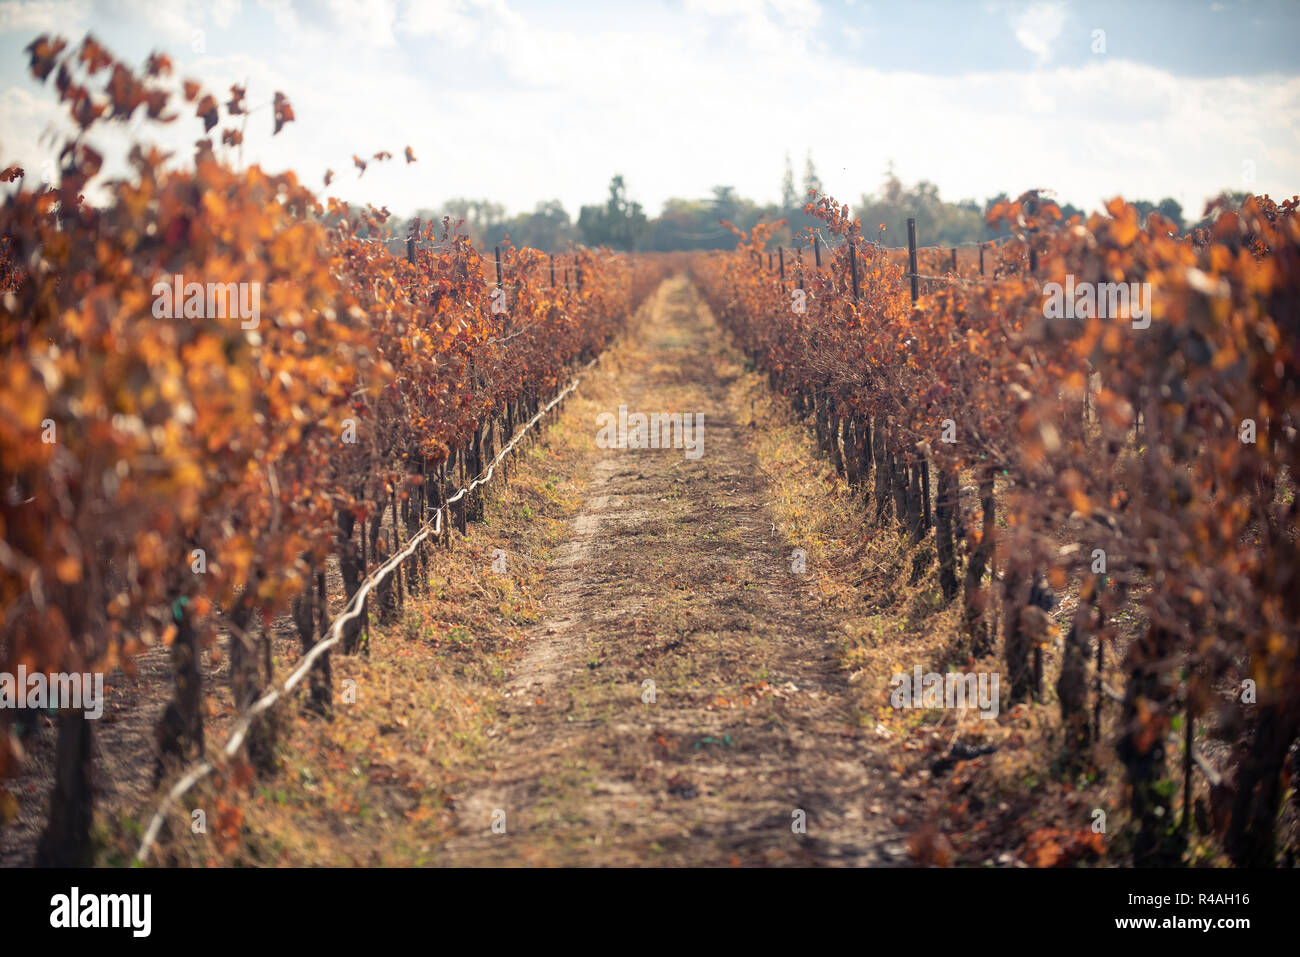 A vineyard resting in winter Stock Photo